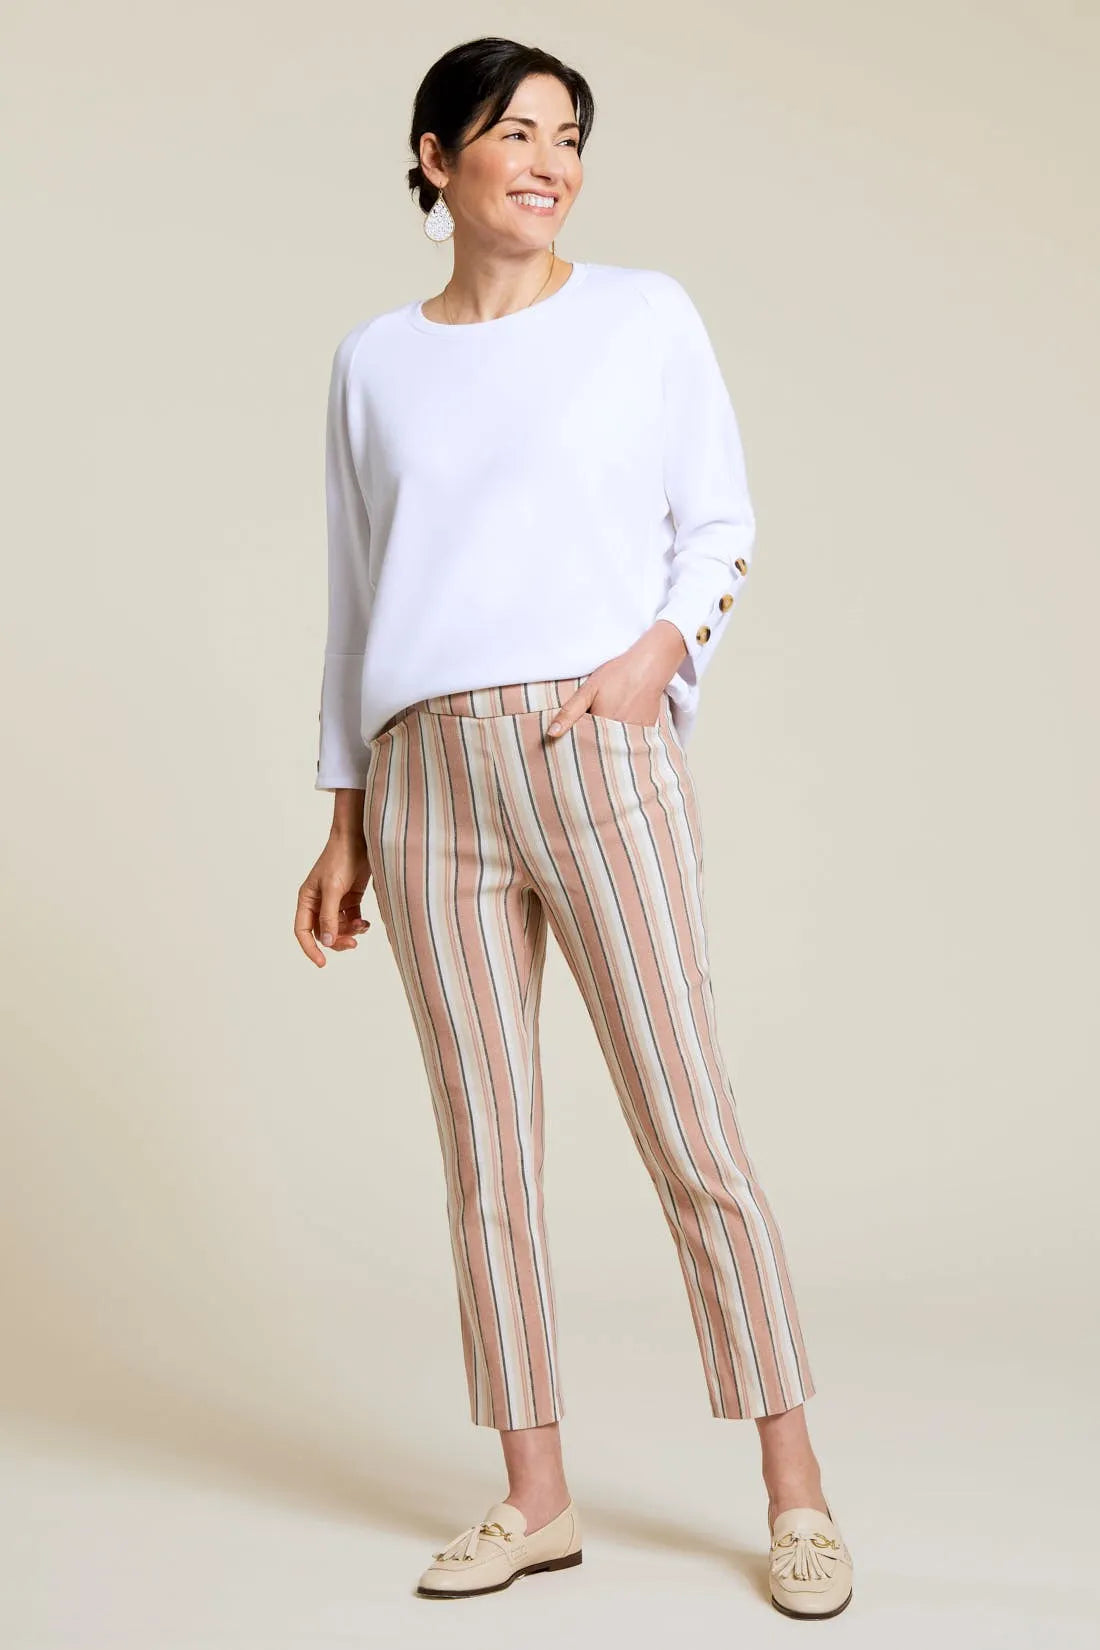 CAPRIS TRIBAL "PULL-ON STRIPED" CLAY